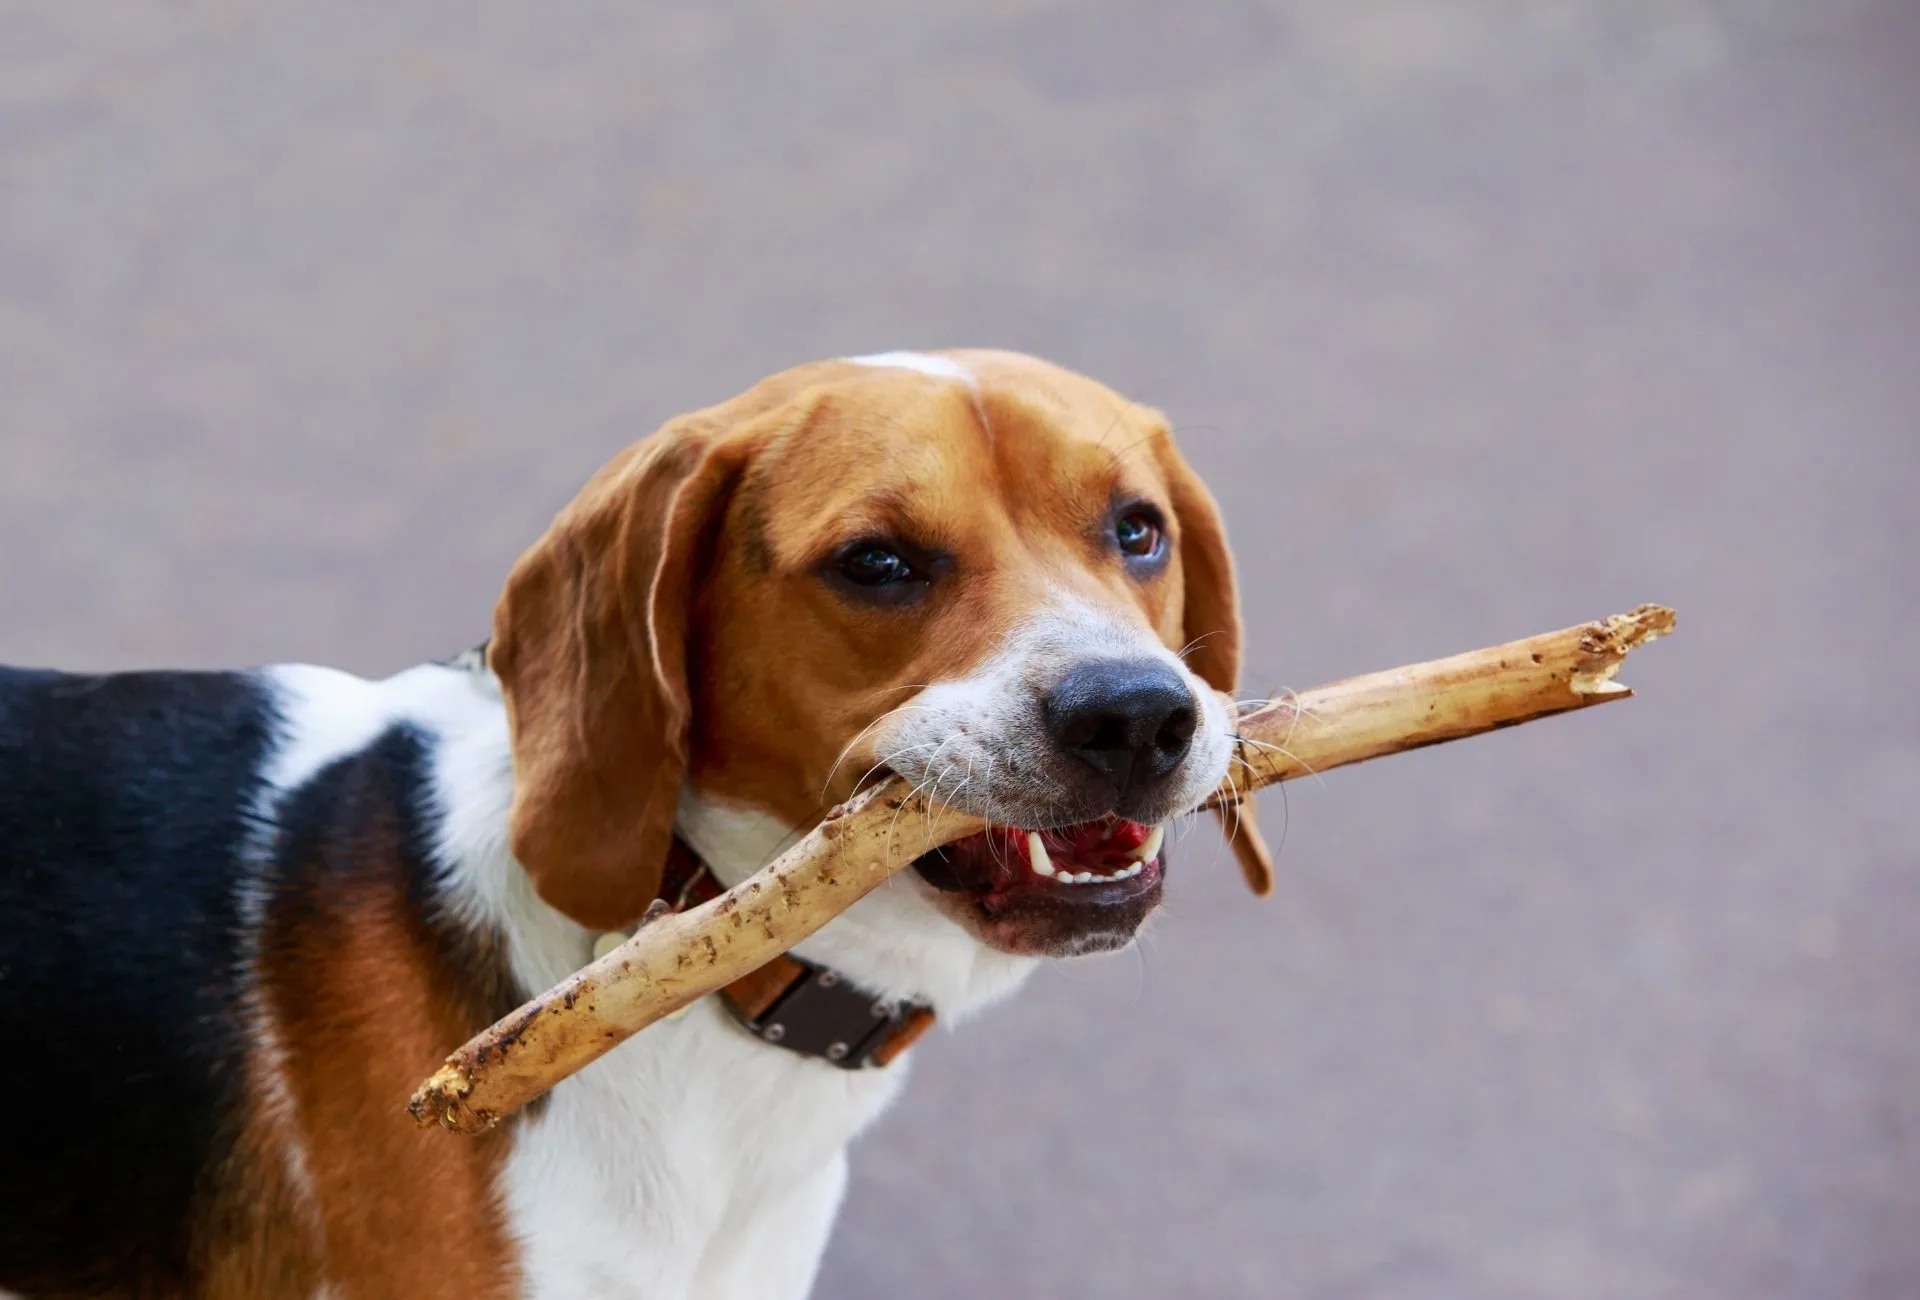 American Foxhound with gentle eyes carries a stick but can turn into a fierce bear hunter with a melodious bark.